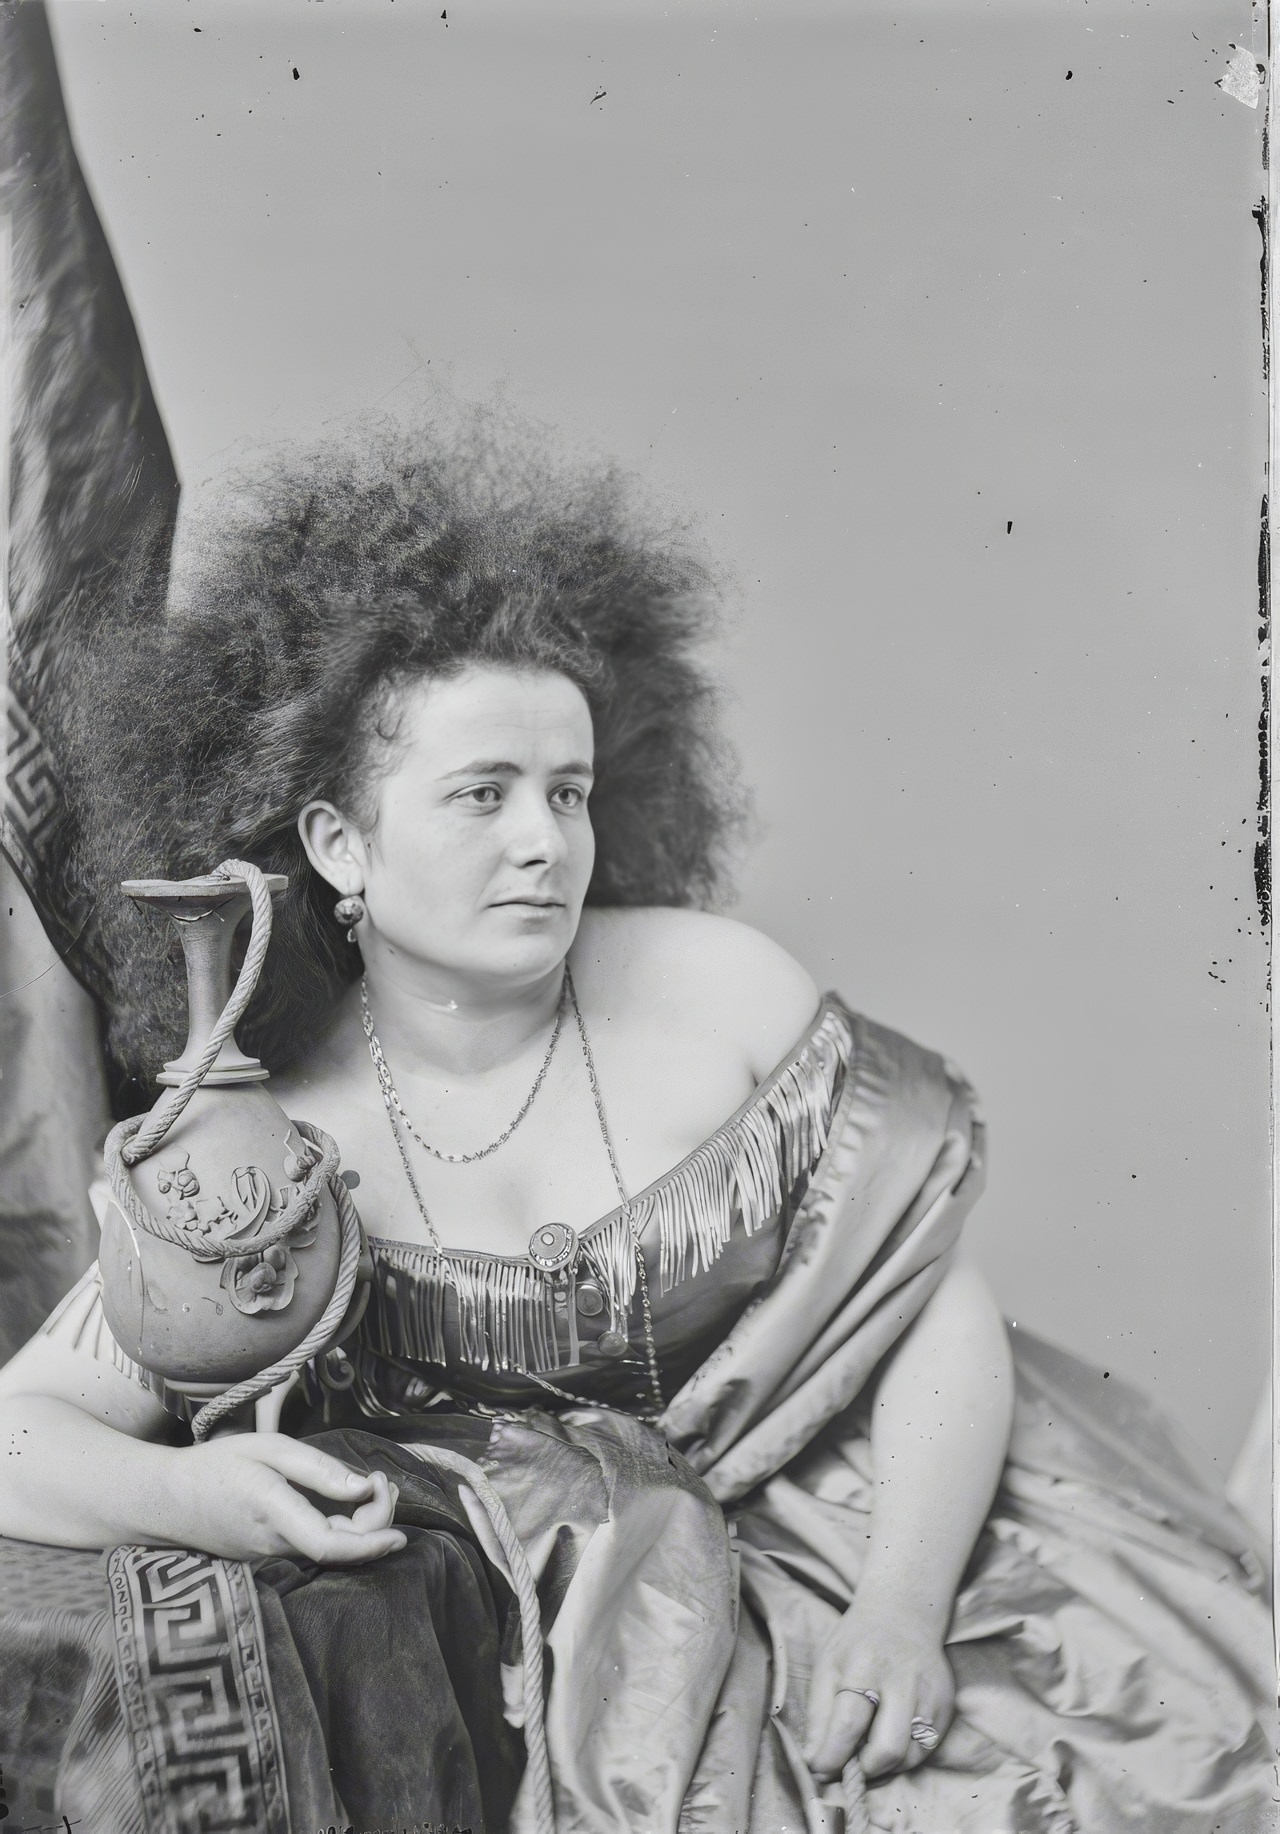 The Enigmatic Circassian Beauties Captured by Mathew Brady Studio in the 19th Century